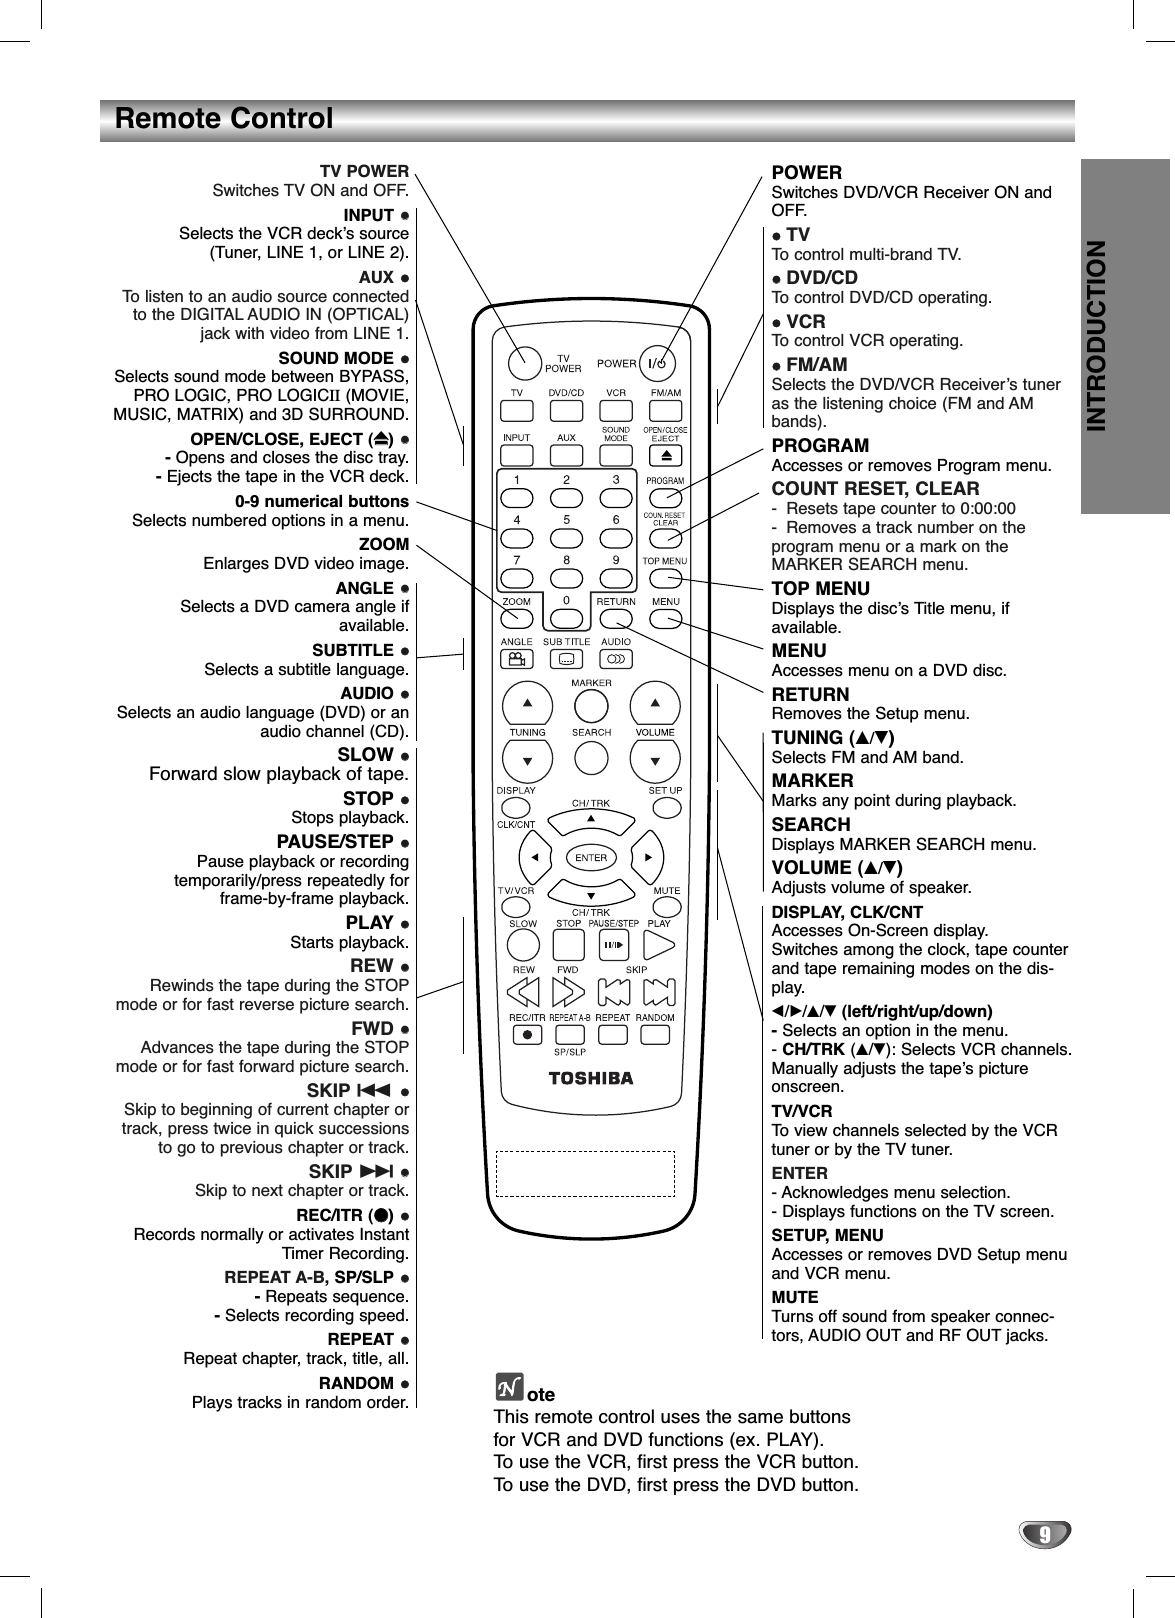 9INTRODUCTIONRemote ControlTV POWERSwitches TV ON and OFF.INPUT Selects the VCR deck’s source (Tuner, LINE 1, or LINE 2).AUX To  listen to an audio source connectedto the DIGITAL AUDIO IN (OPTICAL)jack with video from LINE 1.SOUND MODE Selects sound mode between BYPASS,PRO LOGIC, PRO LOGICII (MOVIE,MUSIC, MATRIX) and 3D SURROUND.OPEN/CLOSE, EJECT (ZZ)- Opens and closes the disc tray.- Ejects the tape in the VCR deck.0-9 numerical buttonsSelects numbered options in a menu.ZOOMEnlarges DVD video image.ANGLE Selects a DVD camera angle if available.SUBTITLE Selects a subtitle language.AUDIO Selects an audio language (DVD) or anaudio channel (CD). SLOW Forward slow playback of tape.STOP Stops playback.PAUSE/STEP Pause playback or recording  temporarily/press repeatedly for frame-by-frame playback.PLAY Starts playback.REW Rewinds the tape during the STOPmode or for fast reverse picture search.FWD Advances the tape during the STOPmode or for fast forward picture search.SKIP . Skip to beginning of current chapter ortrack, press twice in quick successionsto go to previous chapter or track.SKIP &gt;Skip to next chapter or track.REC/ITR (zz)Records normally or activates InstantTimer Recording.REPEAT A-B, SP/SLP - Repeats sequence.- Selects recording speed.REPEAT Repeat chapter, track, title, all.RANDOM Plays tracks in random order.POWERSwitches DVD/VCR Receiver ON andOFF.TVTo  control multi-brand TV. DVD/CDTo  control DVD/CD operating.VCRTo  control VCR operating.FM/AMSelects the DVD/VCR Receiver’s tuneras the listening choice (FM and AMbands).PROGRAMAccesses or removes Program menu.COUNT RESET, CLEAR-Resets tape counter to 0:00:00-Removes a track number on the program menu or a mark on the MARKER SEARCH menu.TOP MENUDisplays the disc’s Title menu, if available.MENUAccesses menu on a DVD disc.RETURNRemoves the Setup menu.TUNING (v/V)Selects FM and AM band. MARKER Marks any point during playback.SEARCH Displays MARKER SEARCH menu.VOLUME (v/V)Adjusts volume of speaker.DISPLAY, CLK/CNTAccesses On-Screen display.Switches among the clock, tape counterand tape remaining modes on the dis-play.b/B/v/V(left/right/up/down)- Selects an option in the menu.- CH/TRK (v/V): Selects VCR channels.Manually adjusts the tape’s pictureonscreen. TV/VCRTo  view channels selected by the VCRtuner or by the TV tuner.ENTER- Acknowledges menu selection.- Displays functions on the TV screen. SETUP, MENUAccesses or removes DVD Setup menuand VCR menu.MUTETurns off sound from speaker connec-tors, AUDIO OUT and RF OUT jacks.oteThis remote control uses the same buttonsfor VCR and DVD functions (ex. PLAY).To  use the VCR, first press the VCR button.To  use the DVD, first press the DVD button.